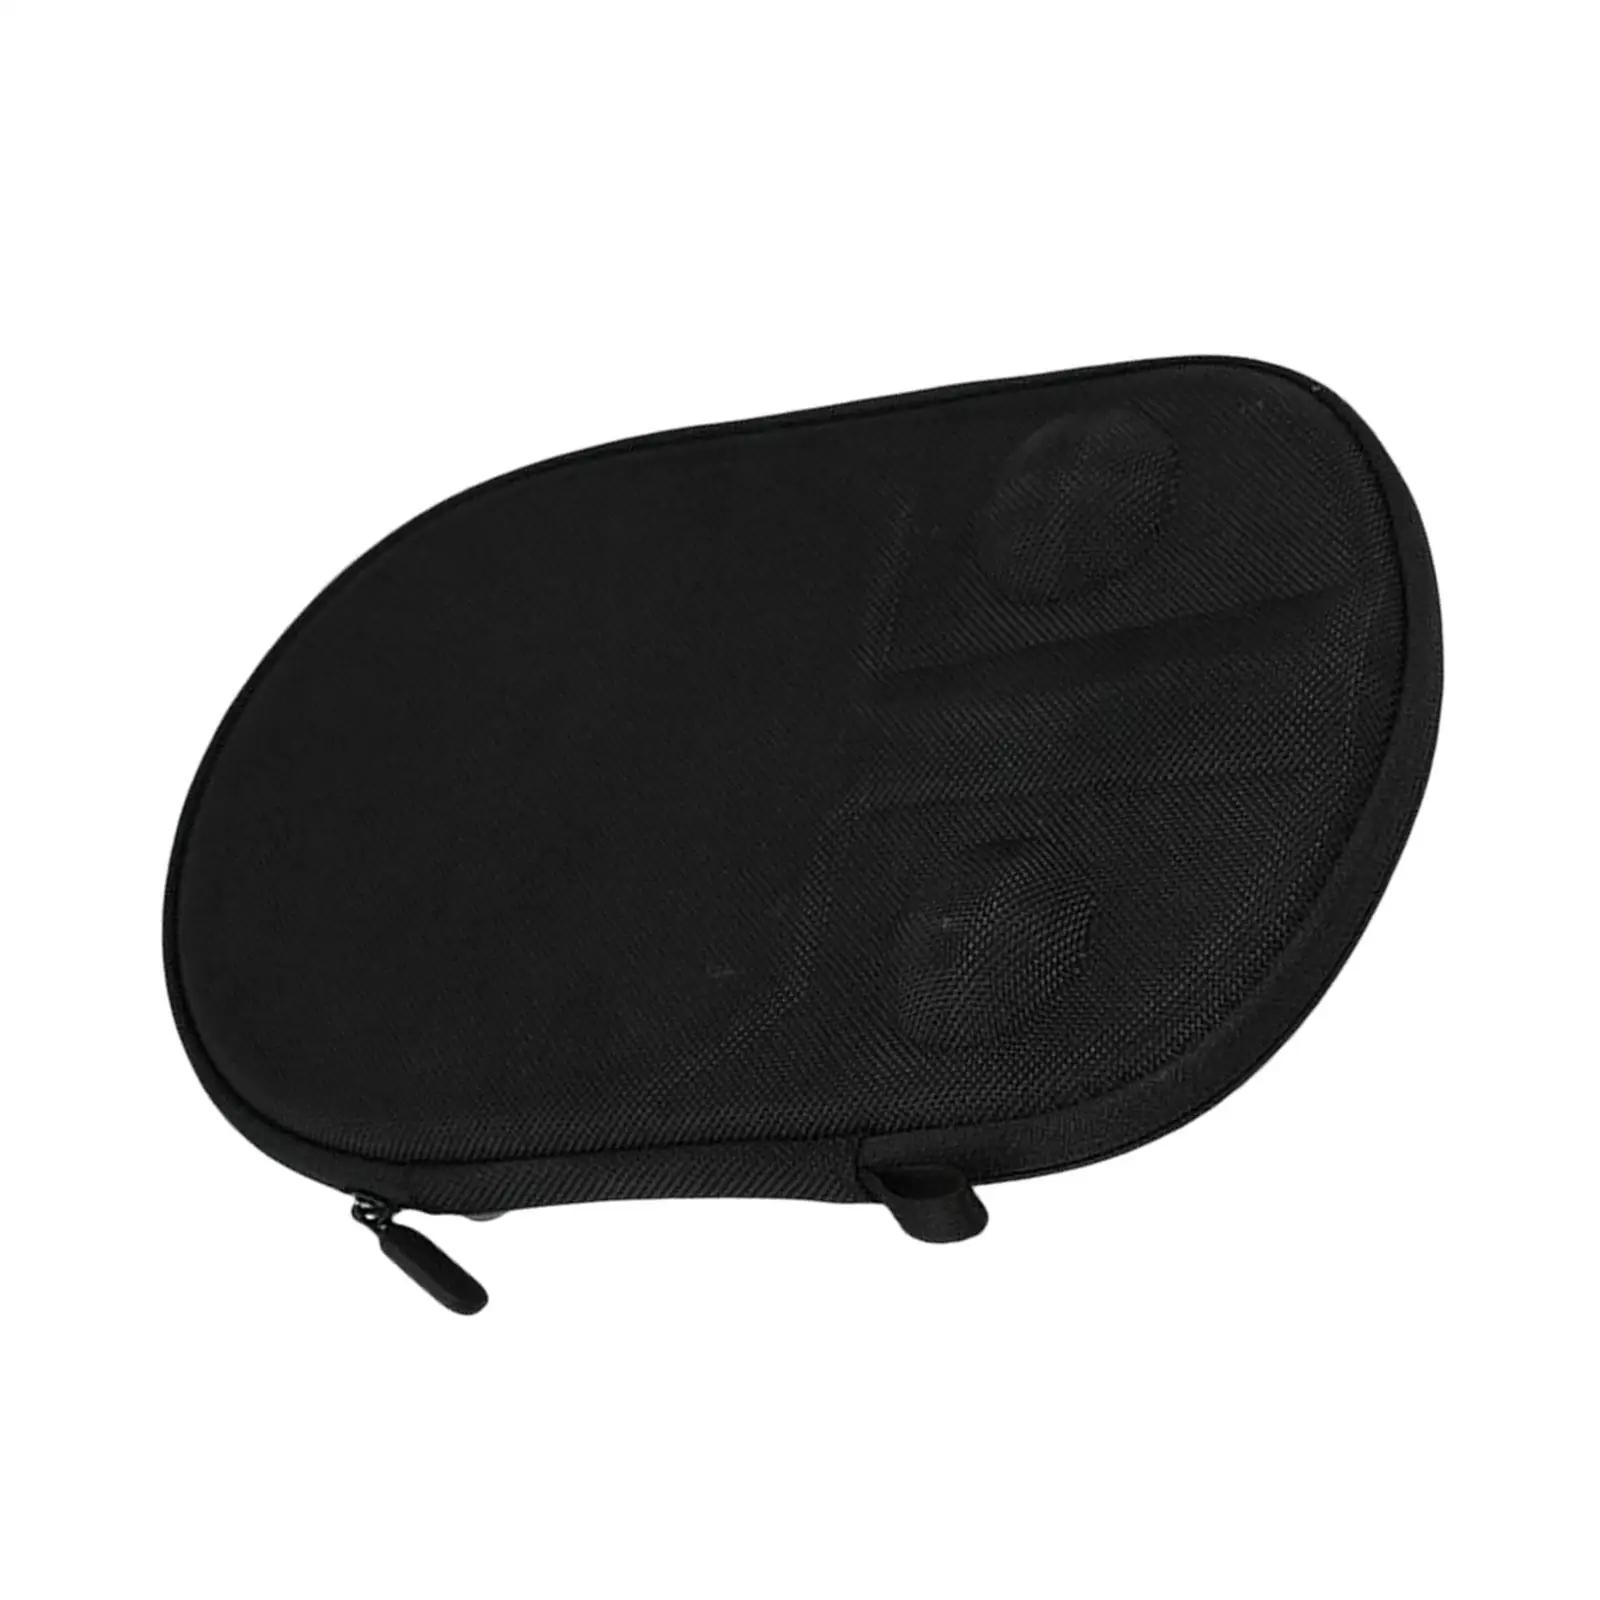 Professional Table Tennis Racket Bag Pong Paddle Bag Storage Case Table Tennis Protector Wear Resistant Sturdy for Outdoor